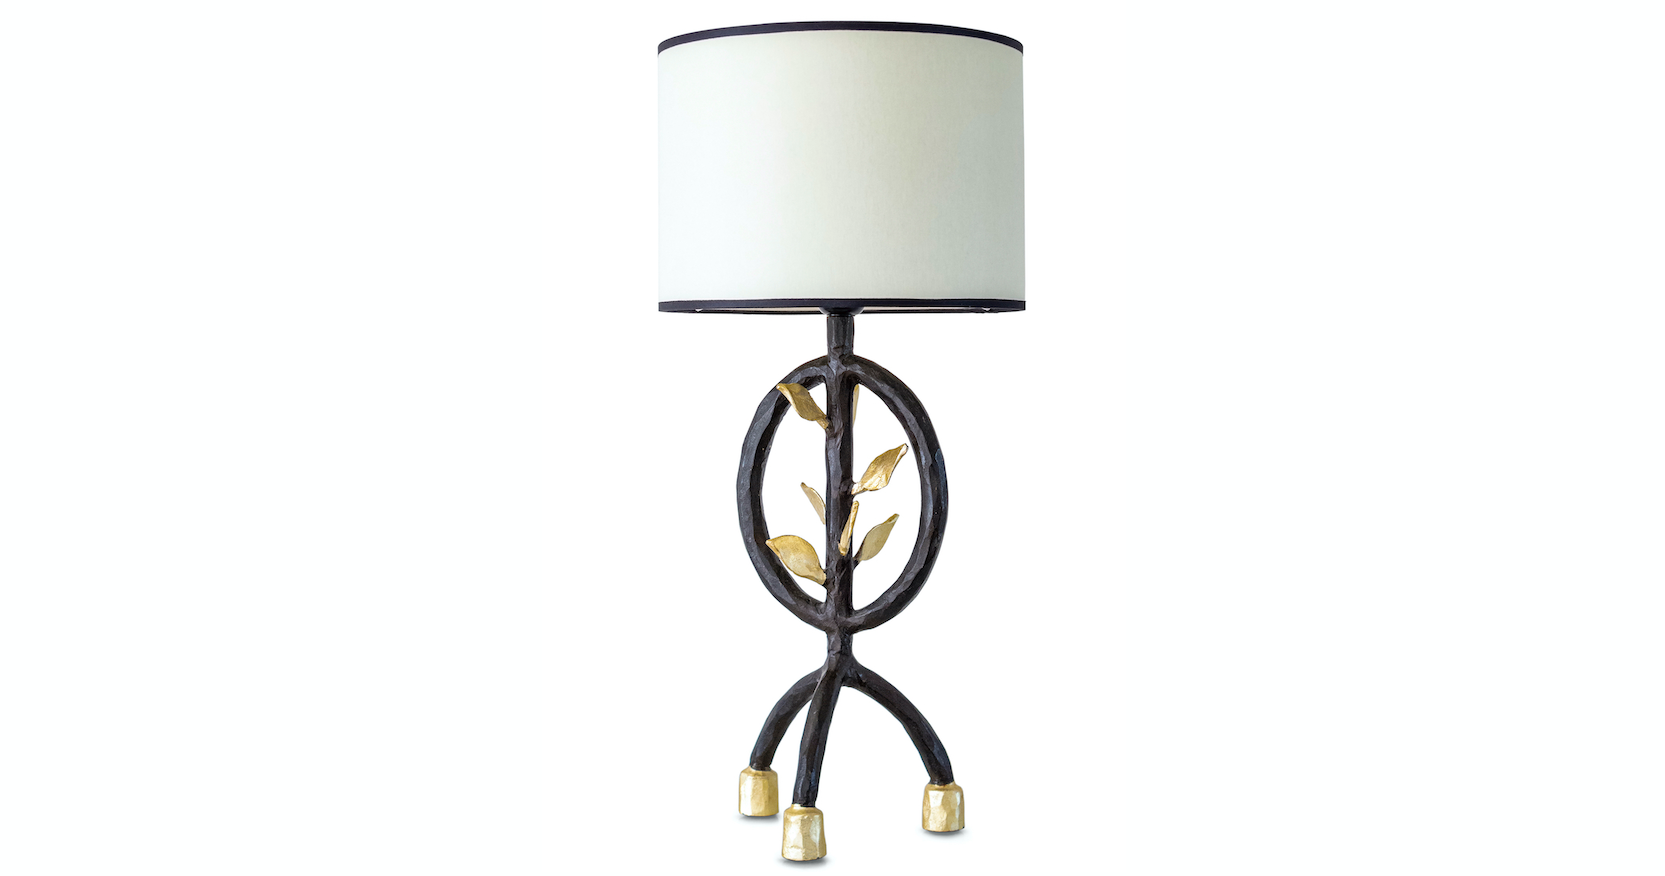 Garouste Bonetti, lamp with a base in brown wrought iron which ends by 3 legs, in the middle, golden leaves in wrought iron, beige cylindric shade